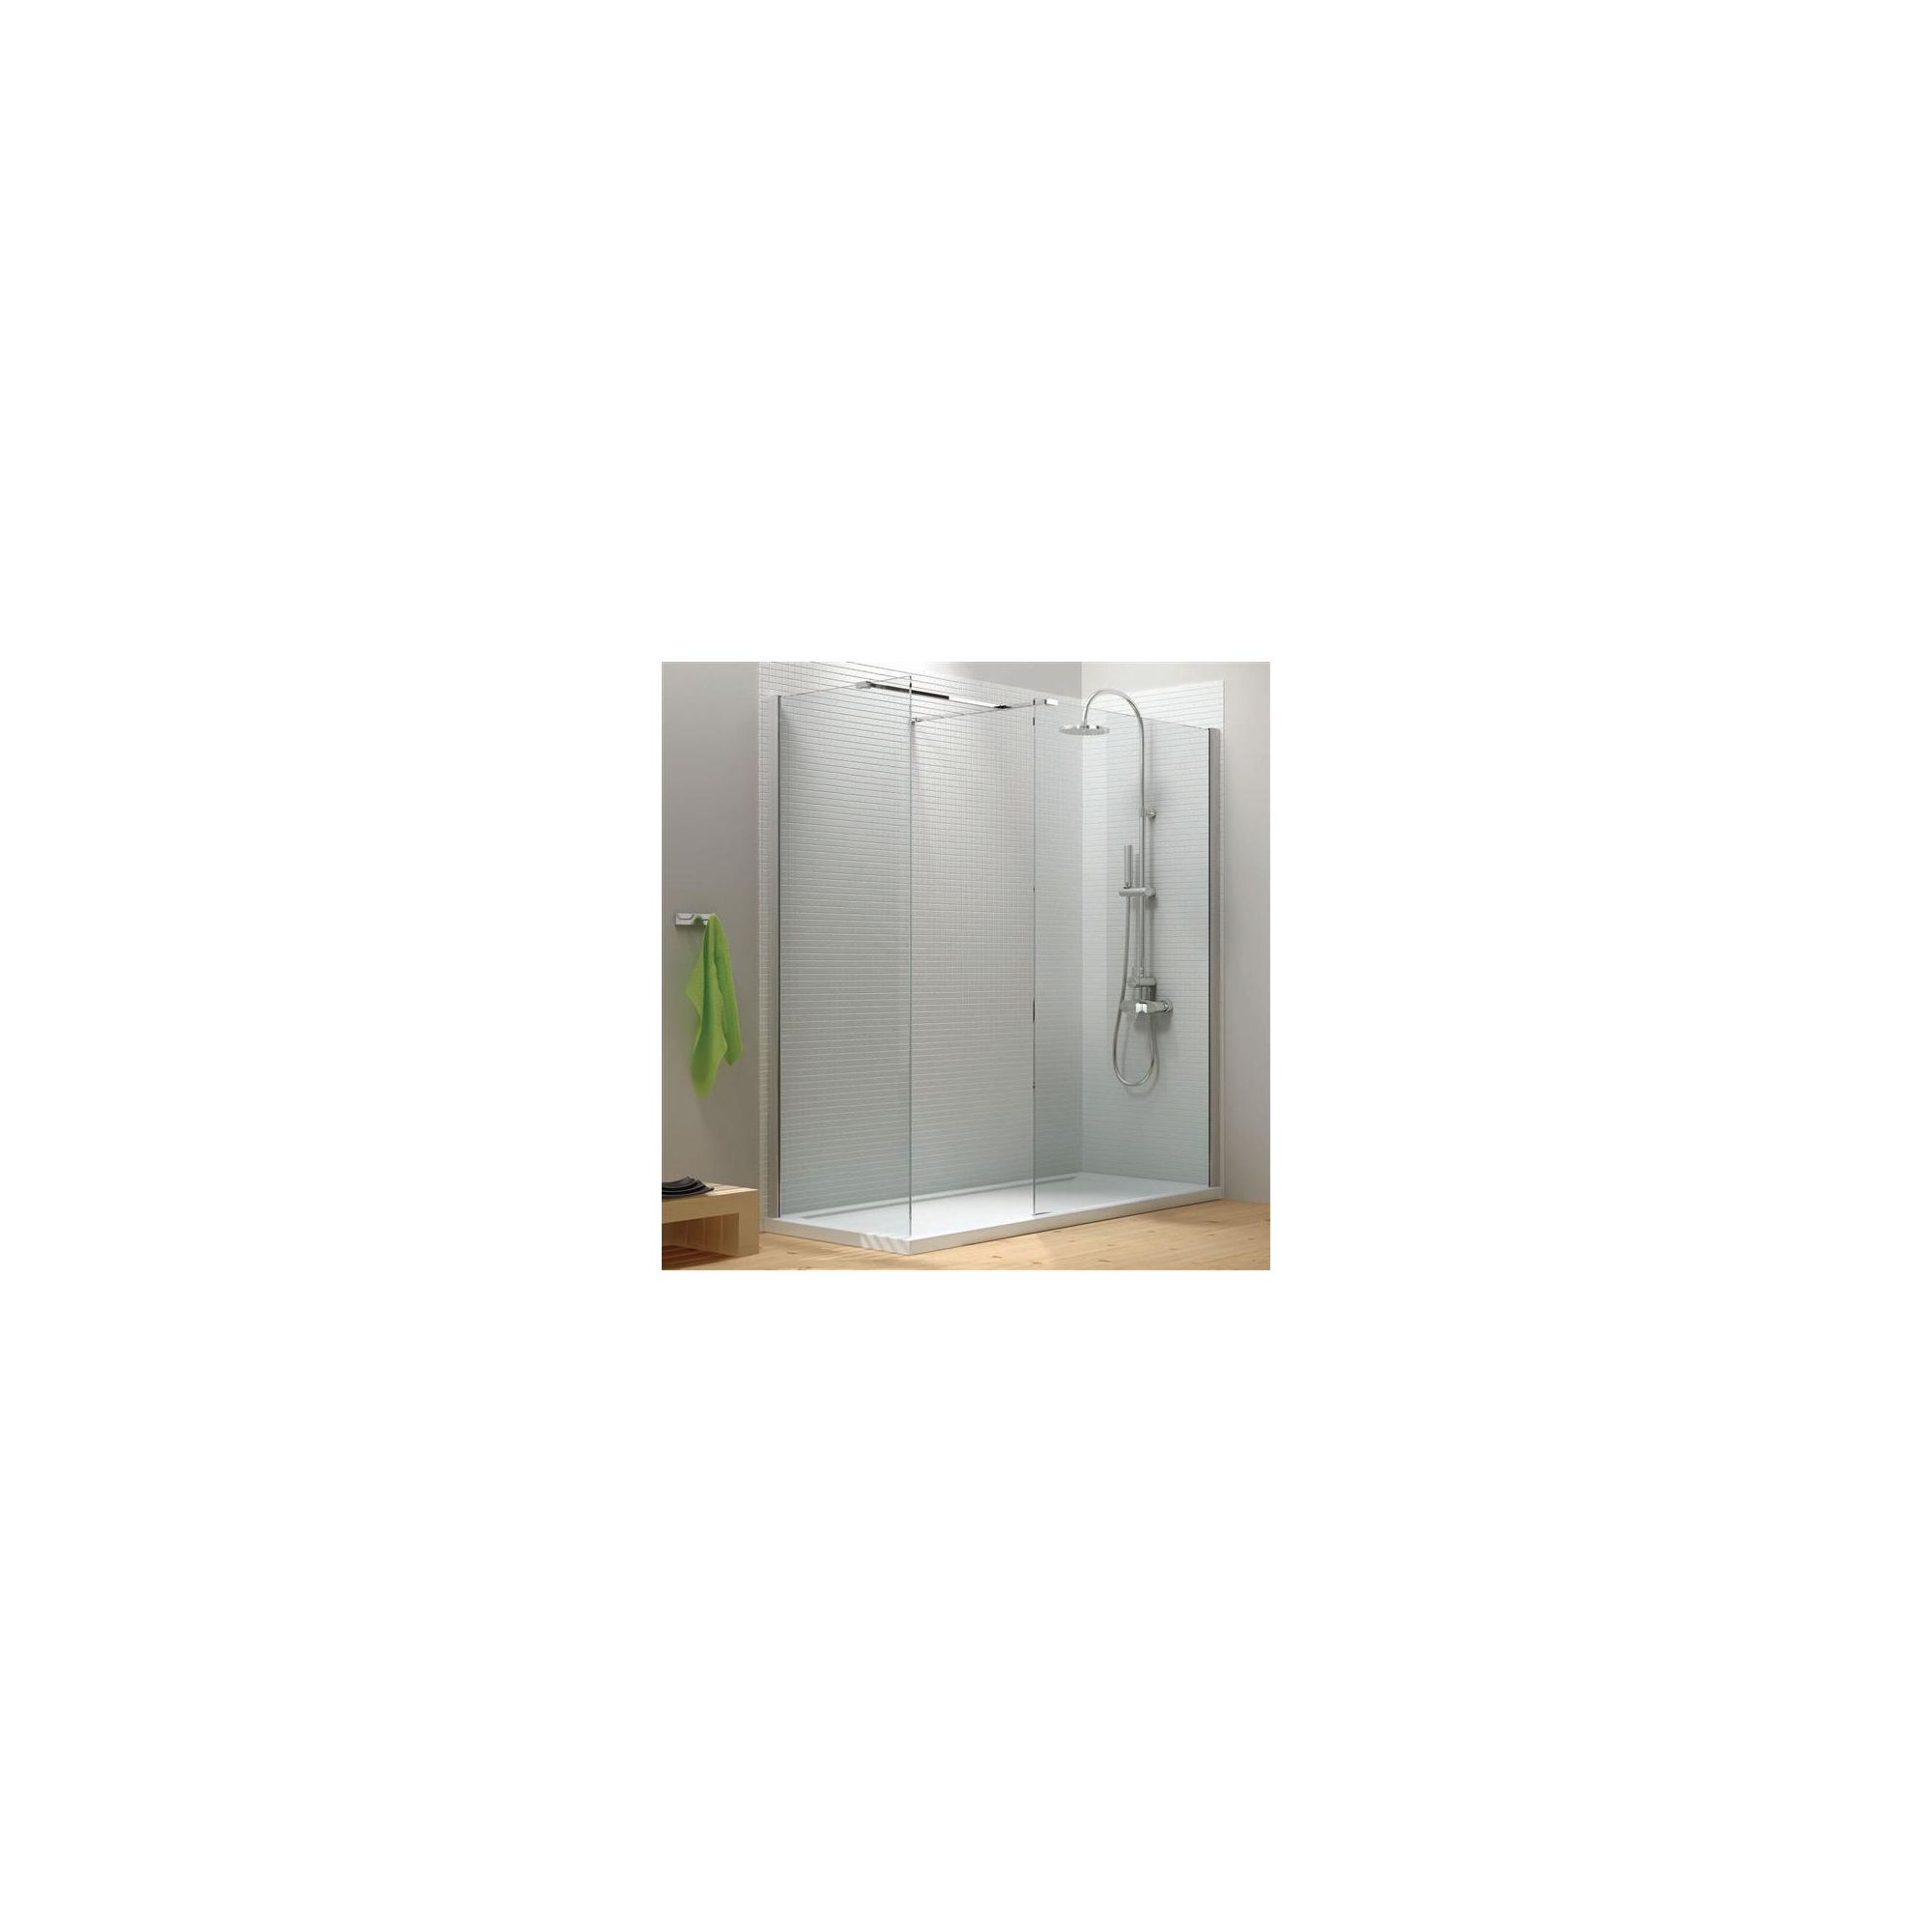 Merlyn Vivid Eight Walk-In Shower Enclosure, 1700mm x 800mm, excluding Tray, 8mm Glass at Tesco Direct